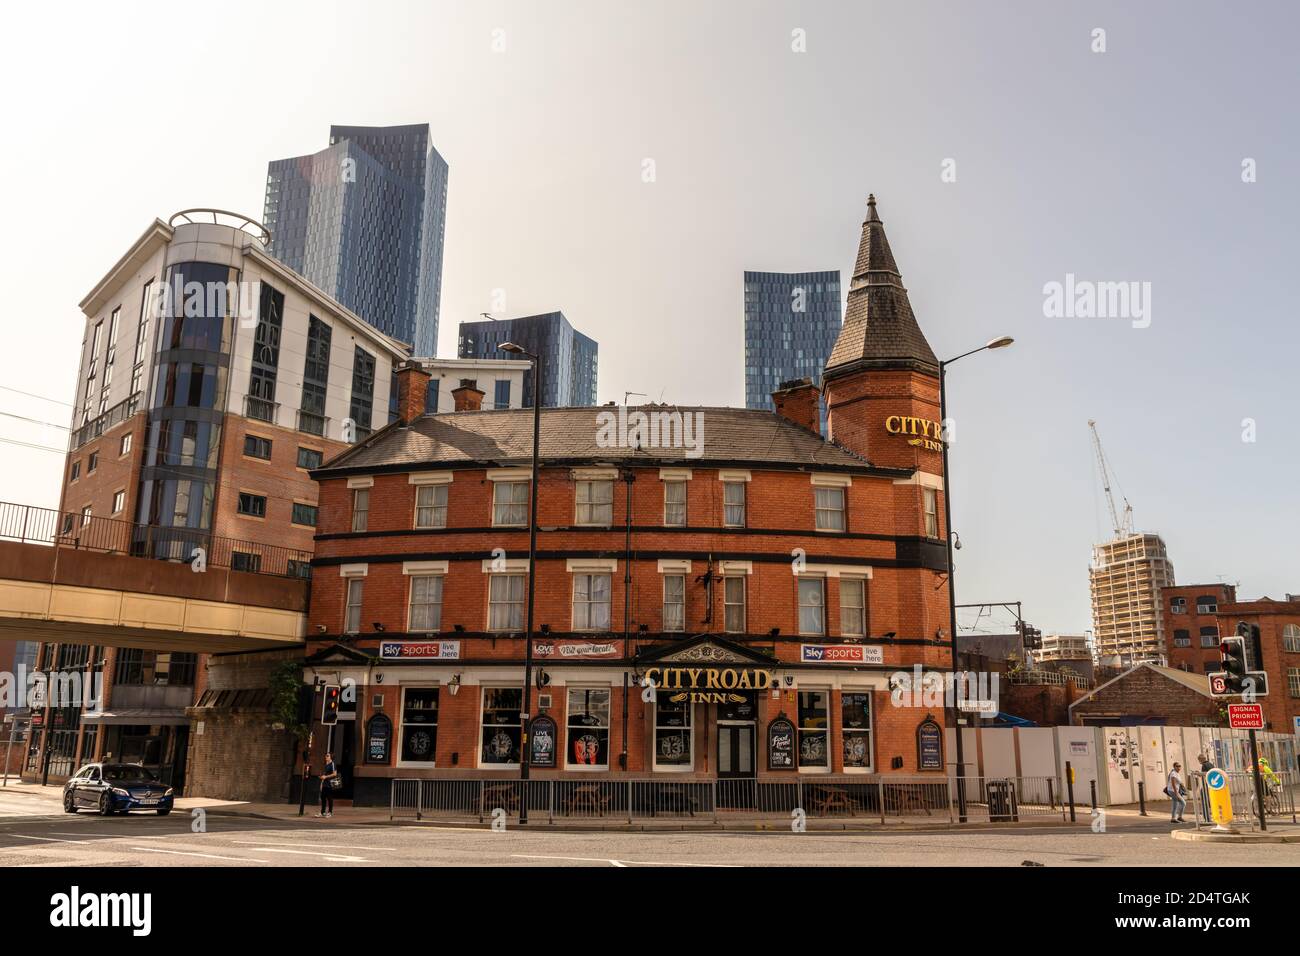 Historic building of The City Road Inn by Deansgate Locks an old survivor among tall modern buildings in the city centre. Stock Photo